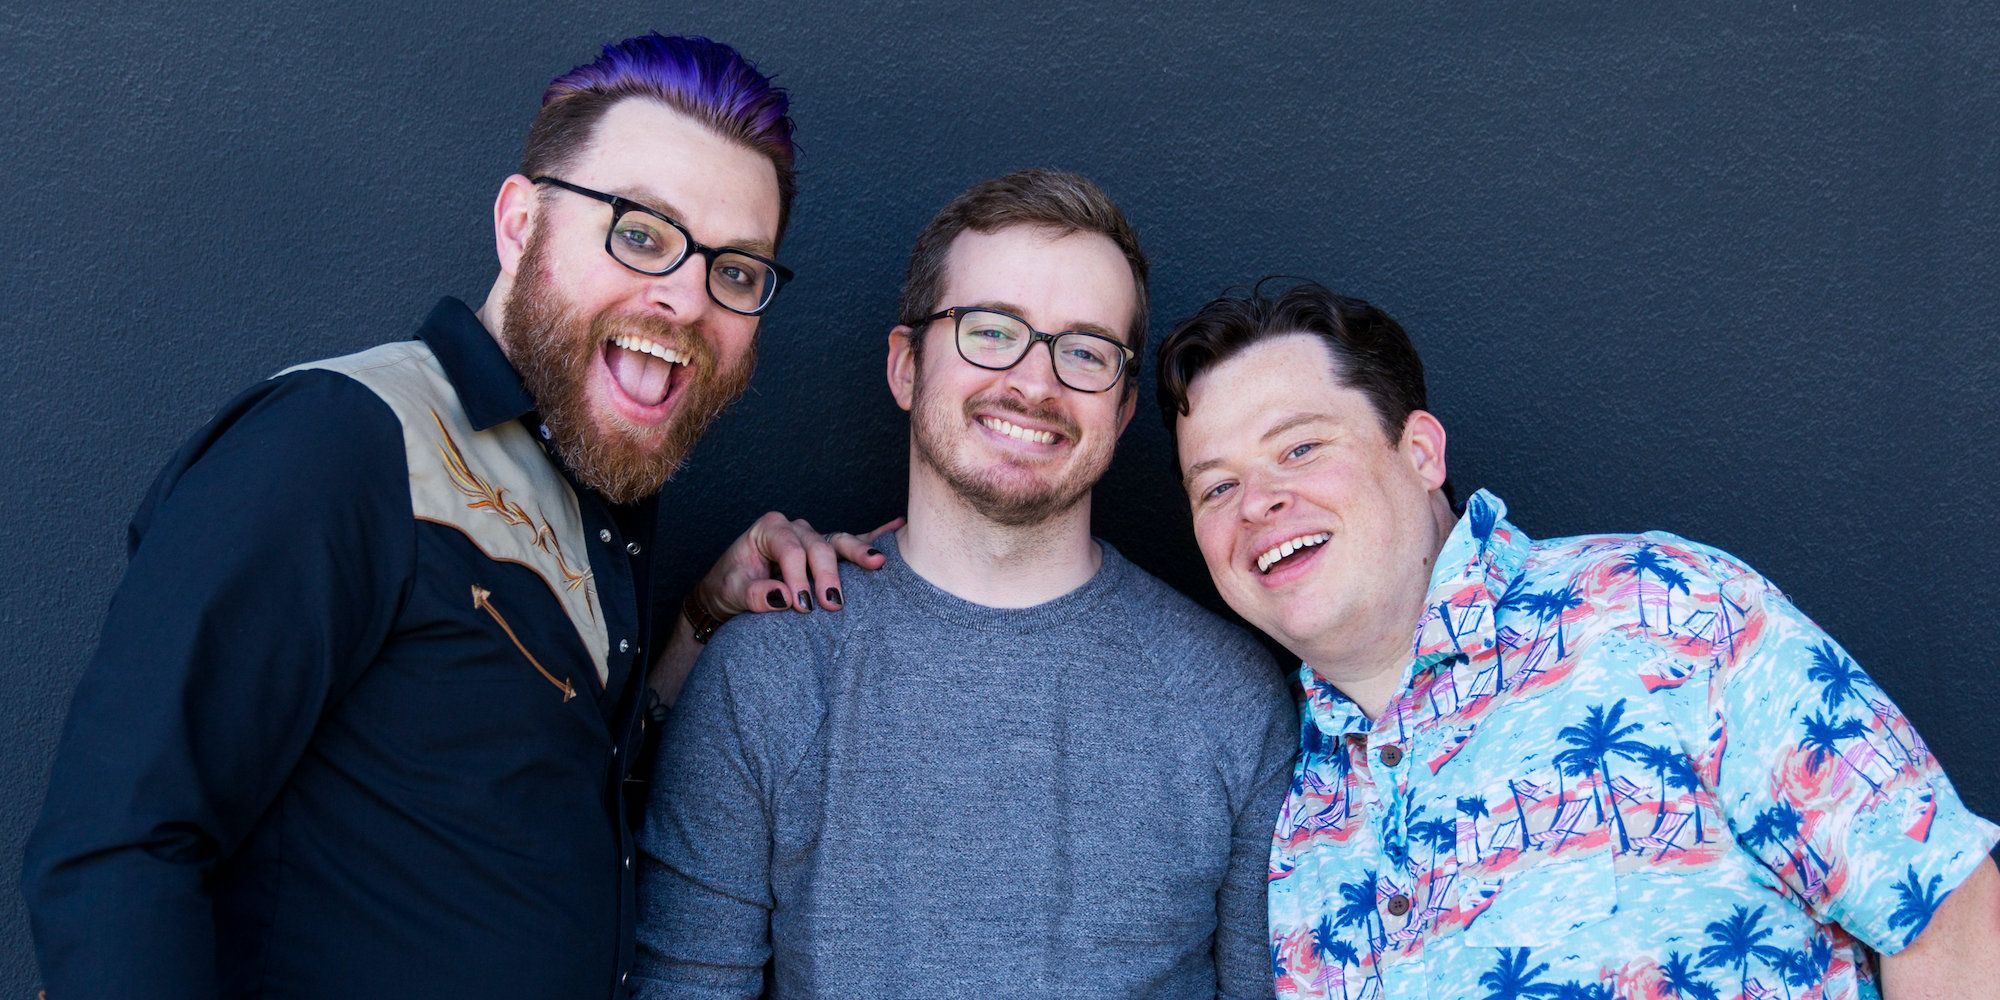 Justin, Travis, and Griffin McElroy smiling at the camera